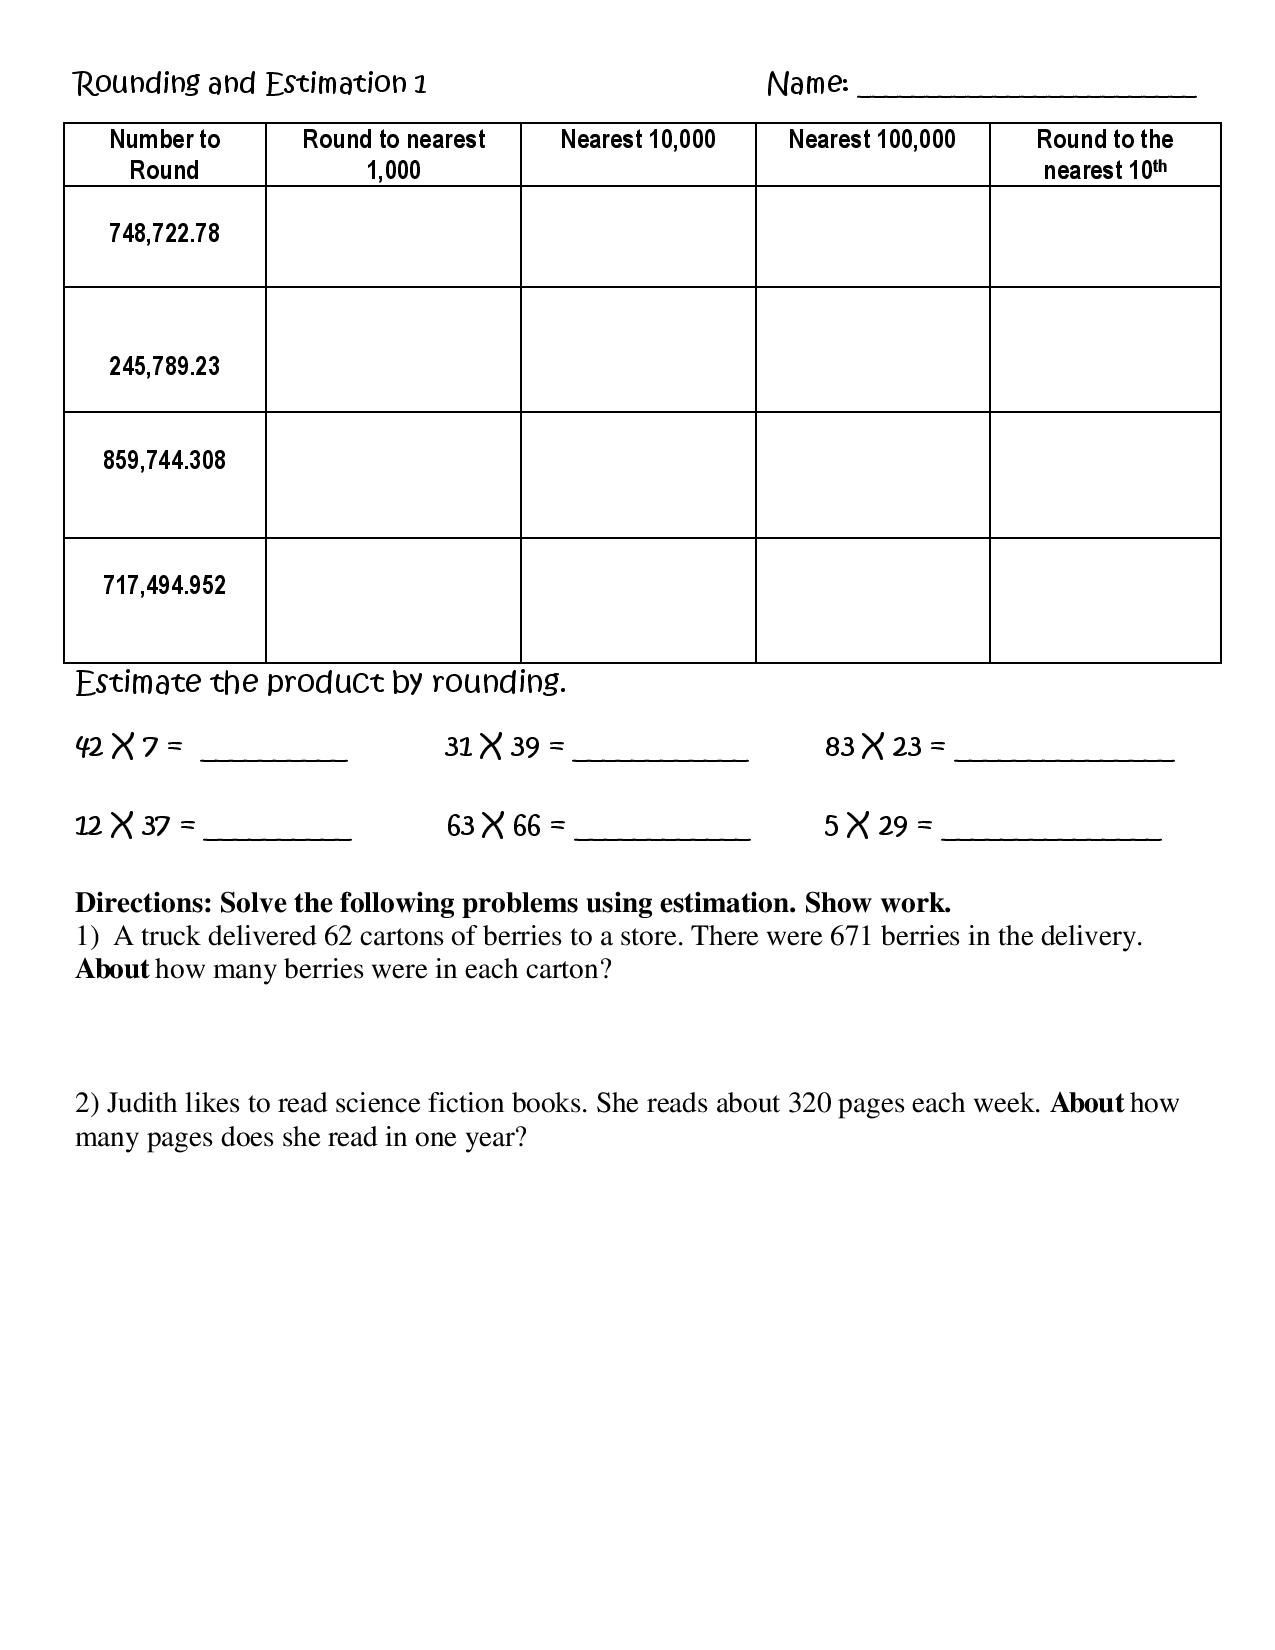 Estimation Worksheets 3rd Grade Rounding and Estimation Worksheets for Practice 5 Nbt 4